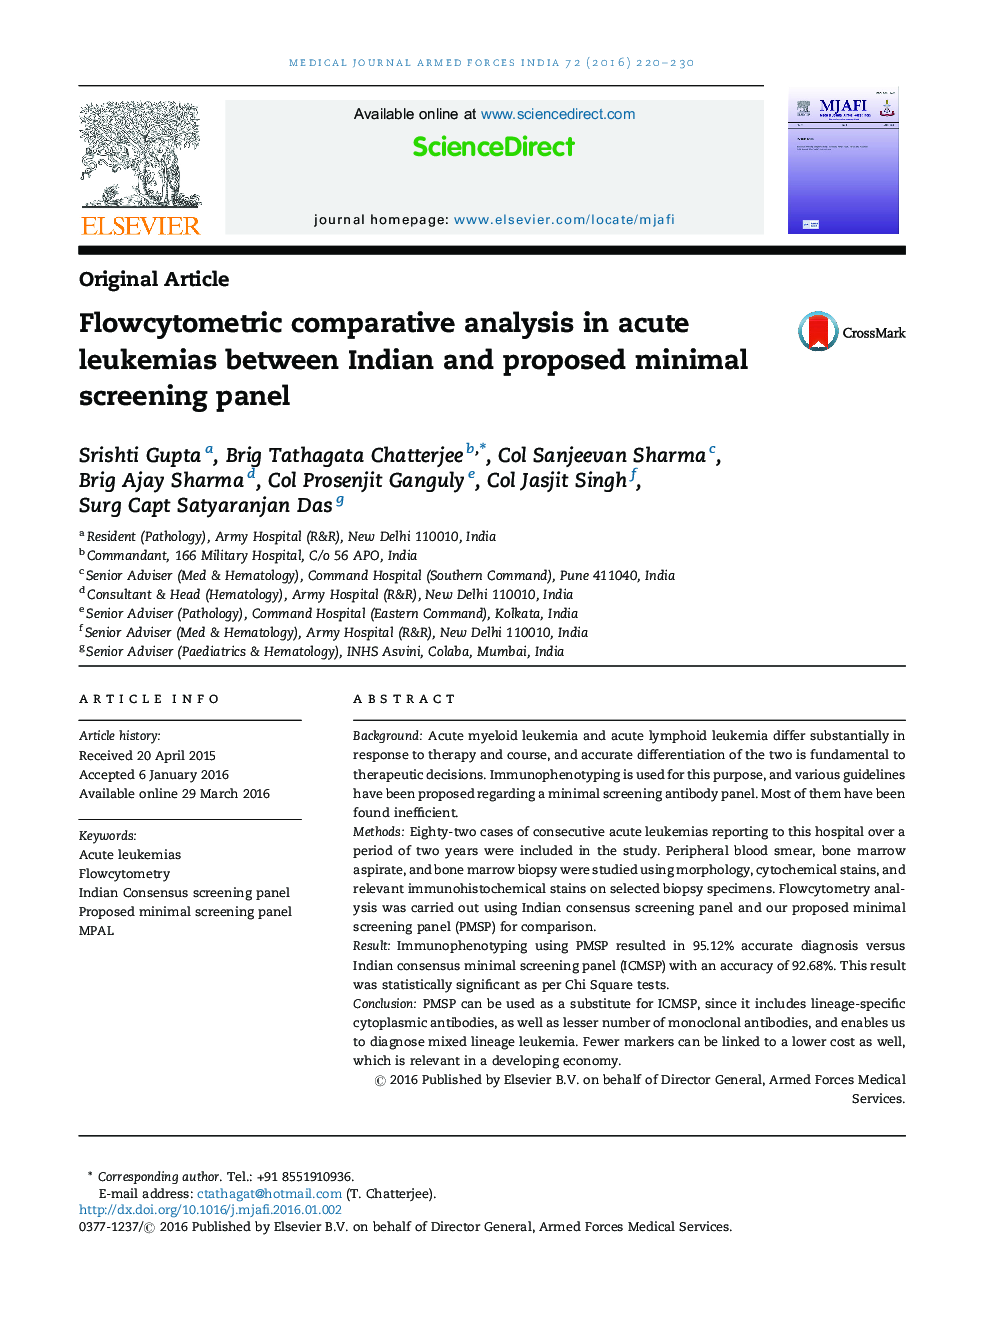 Flowcytometric comparative analysis in acute leukemias between Indian and proposed minimal screening panel